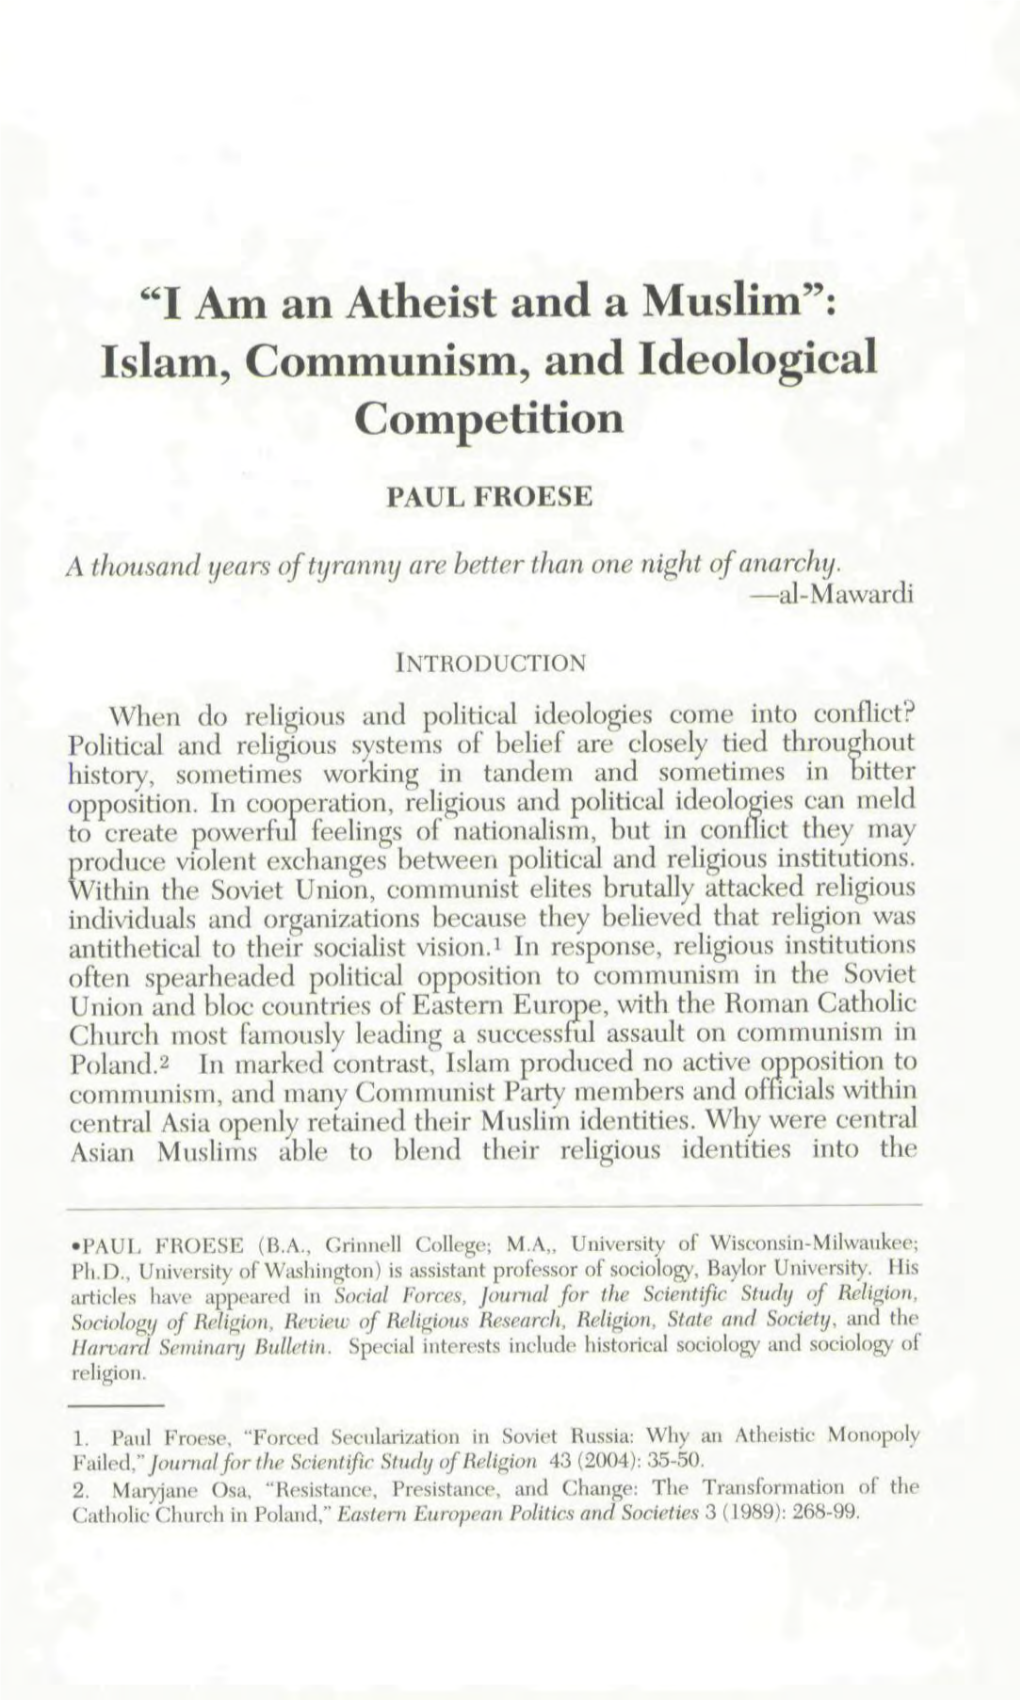 I Am an Atheist and a Muslim": Islam, Communism, and Ideological Competition